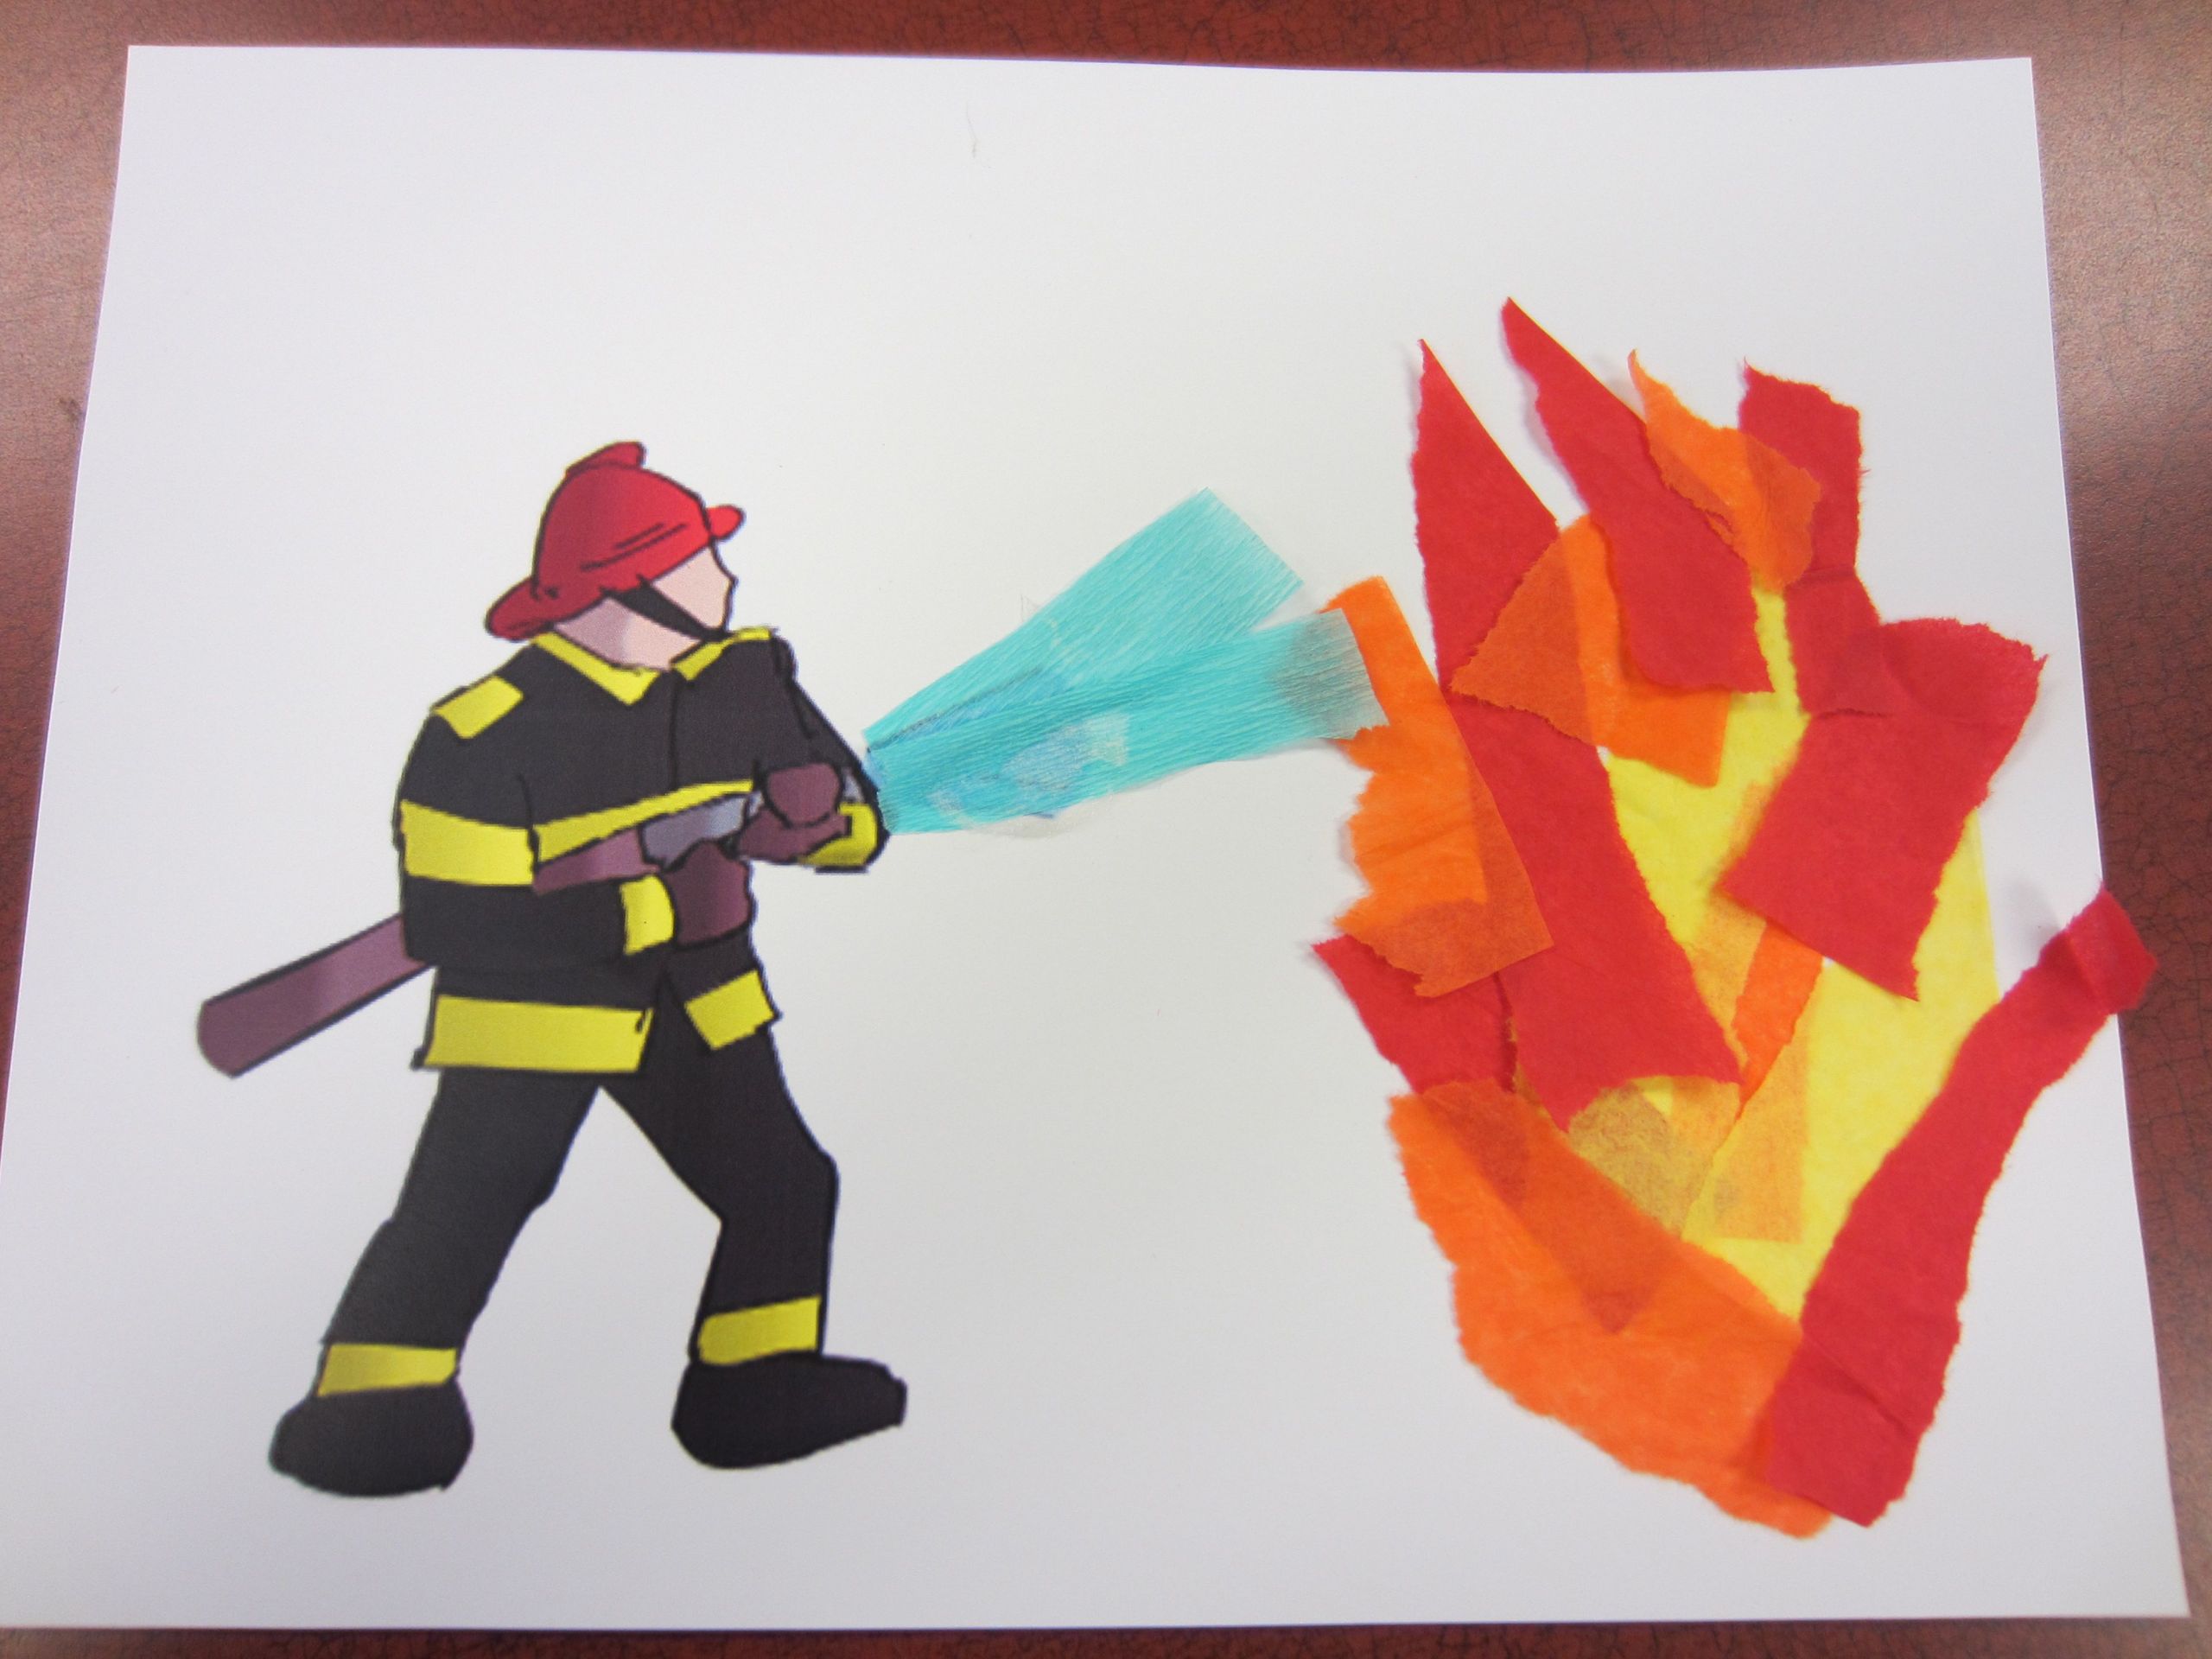 Fireman Craft Ideas For Preschoolers
 A pre printed firefighter picture and torn tissue paper